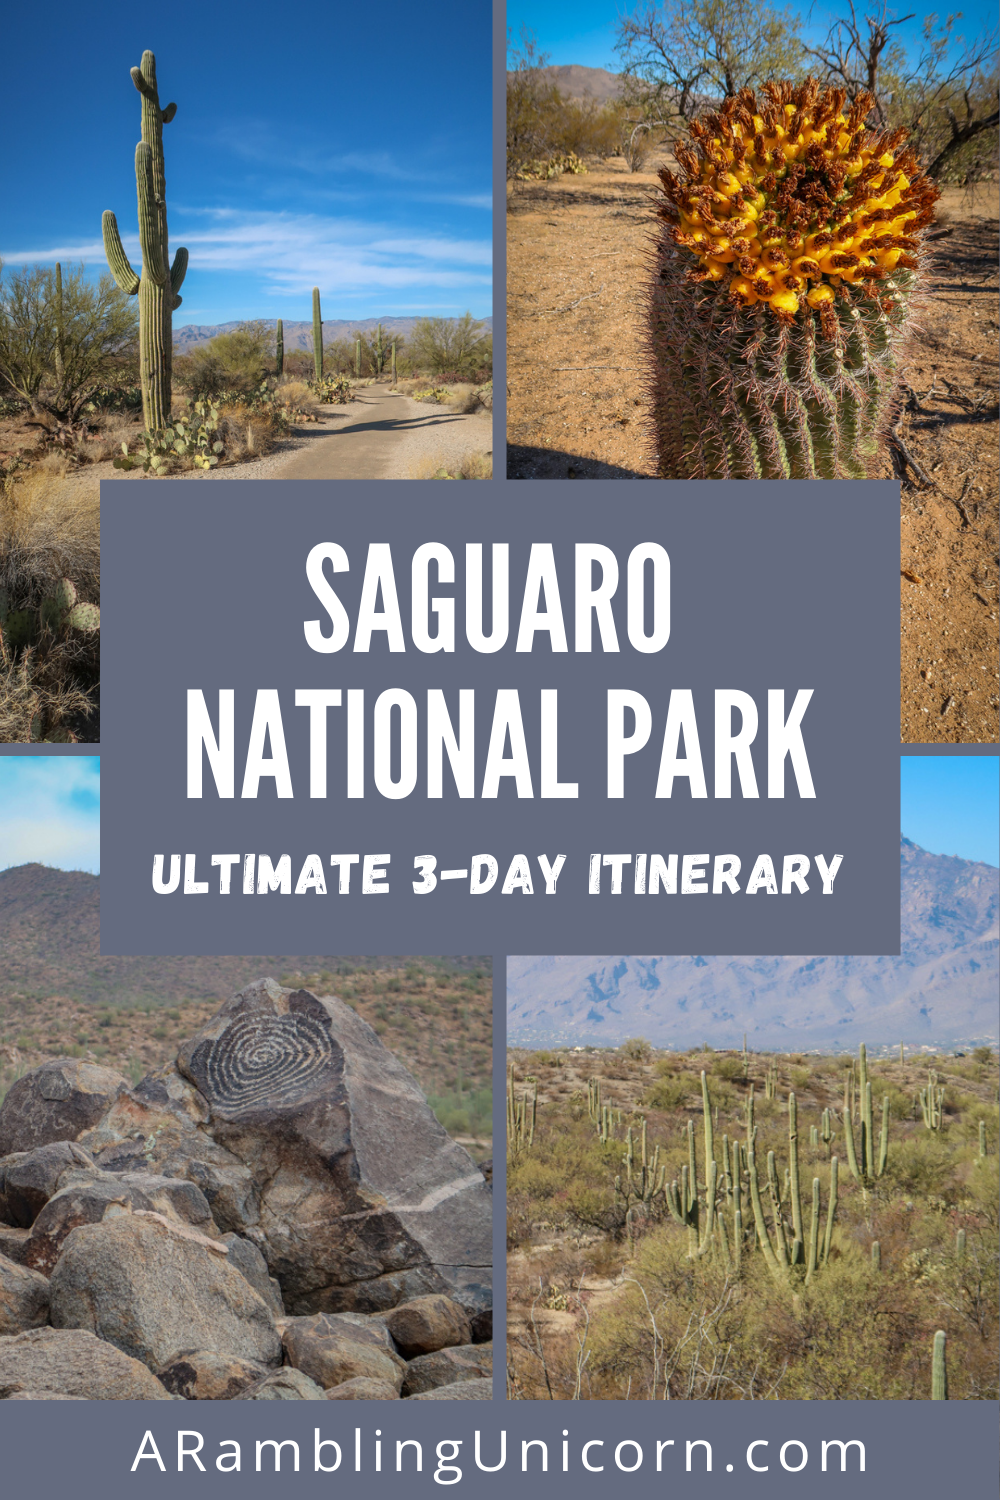 Collage of photos from Saguaro National Park